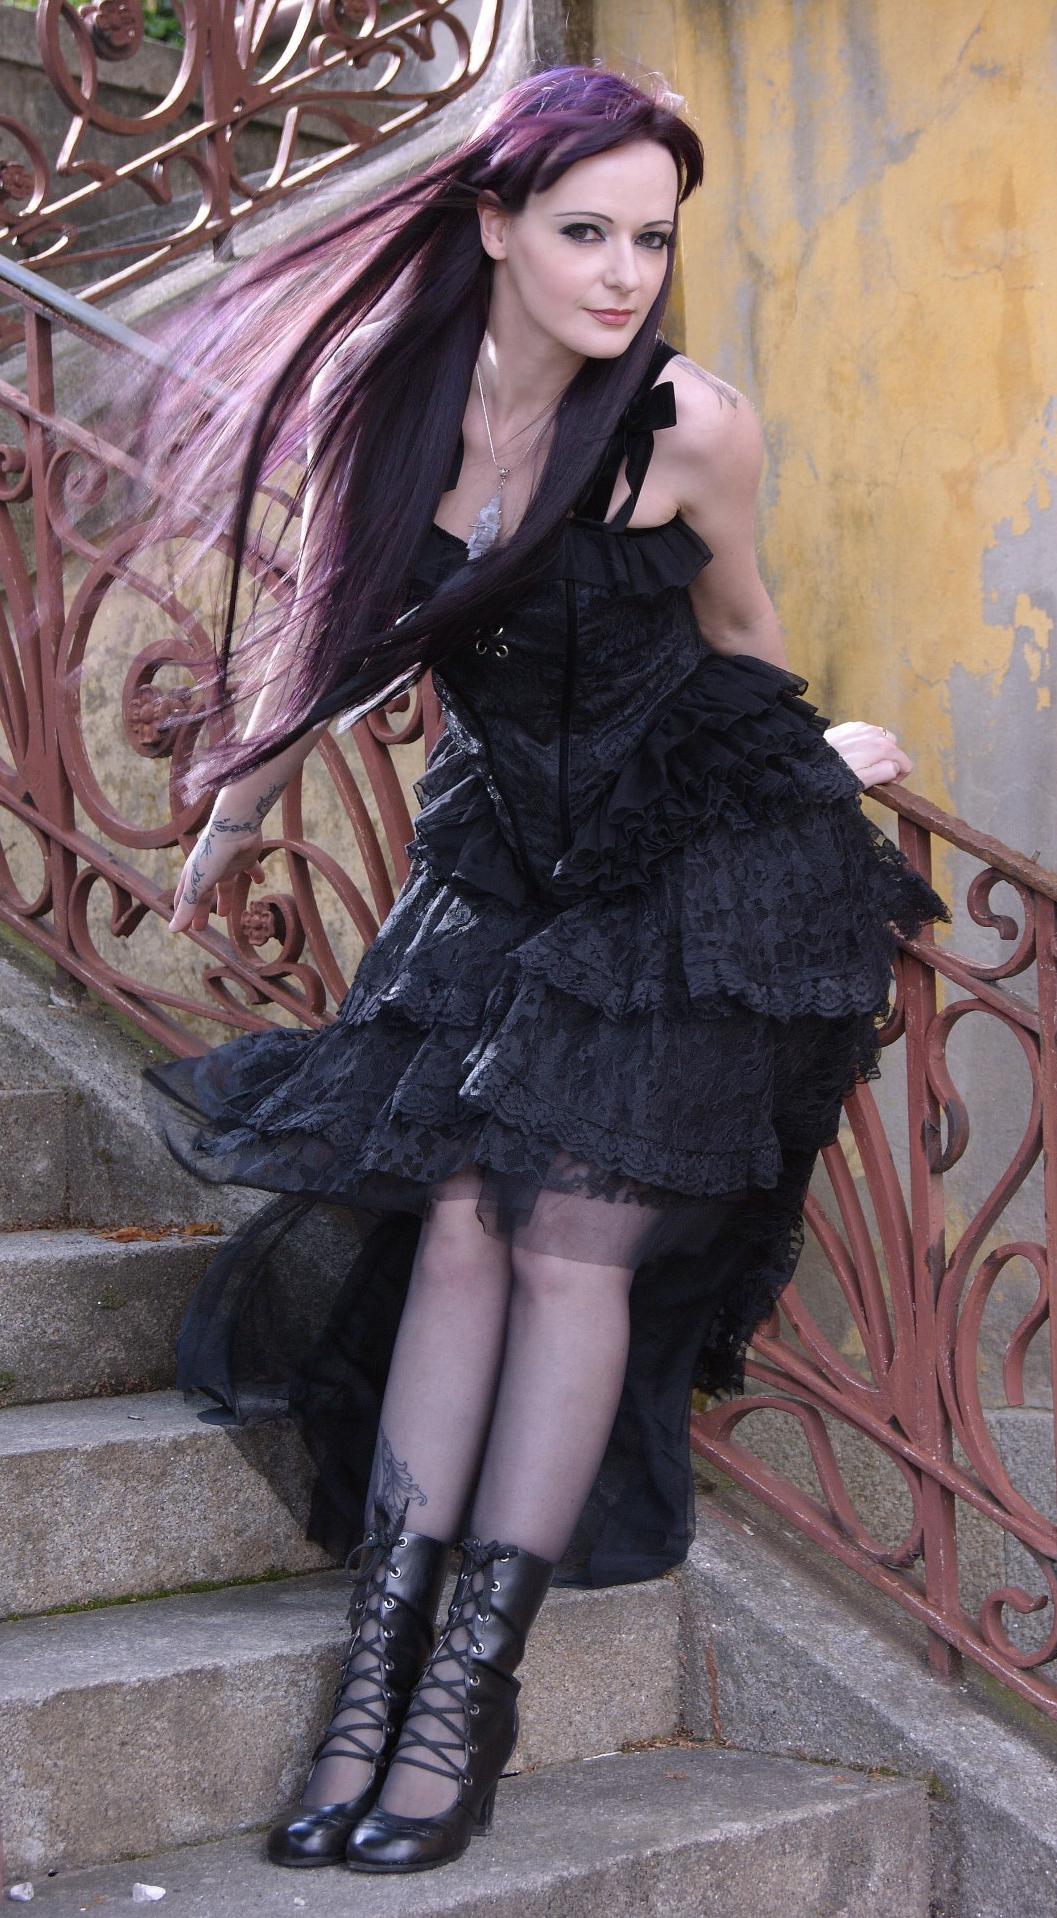 Purple Haired Gothic Girl wearing Black Sheer Pantyhose and Black Short Tulle Dress